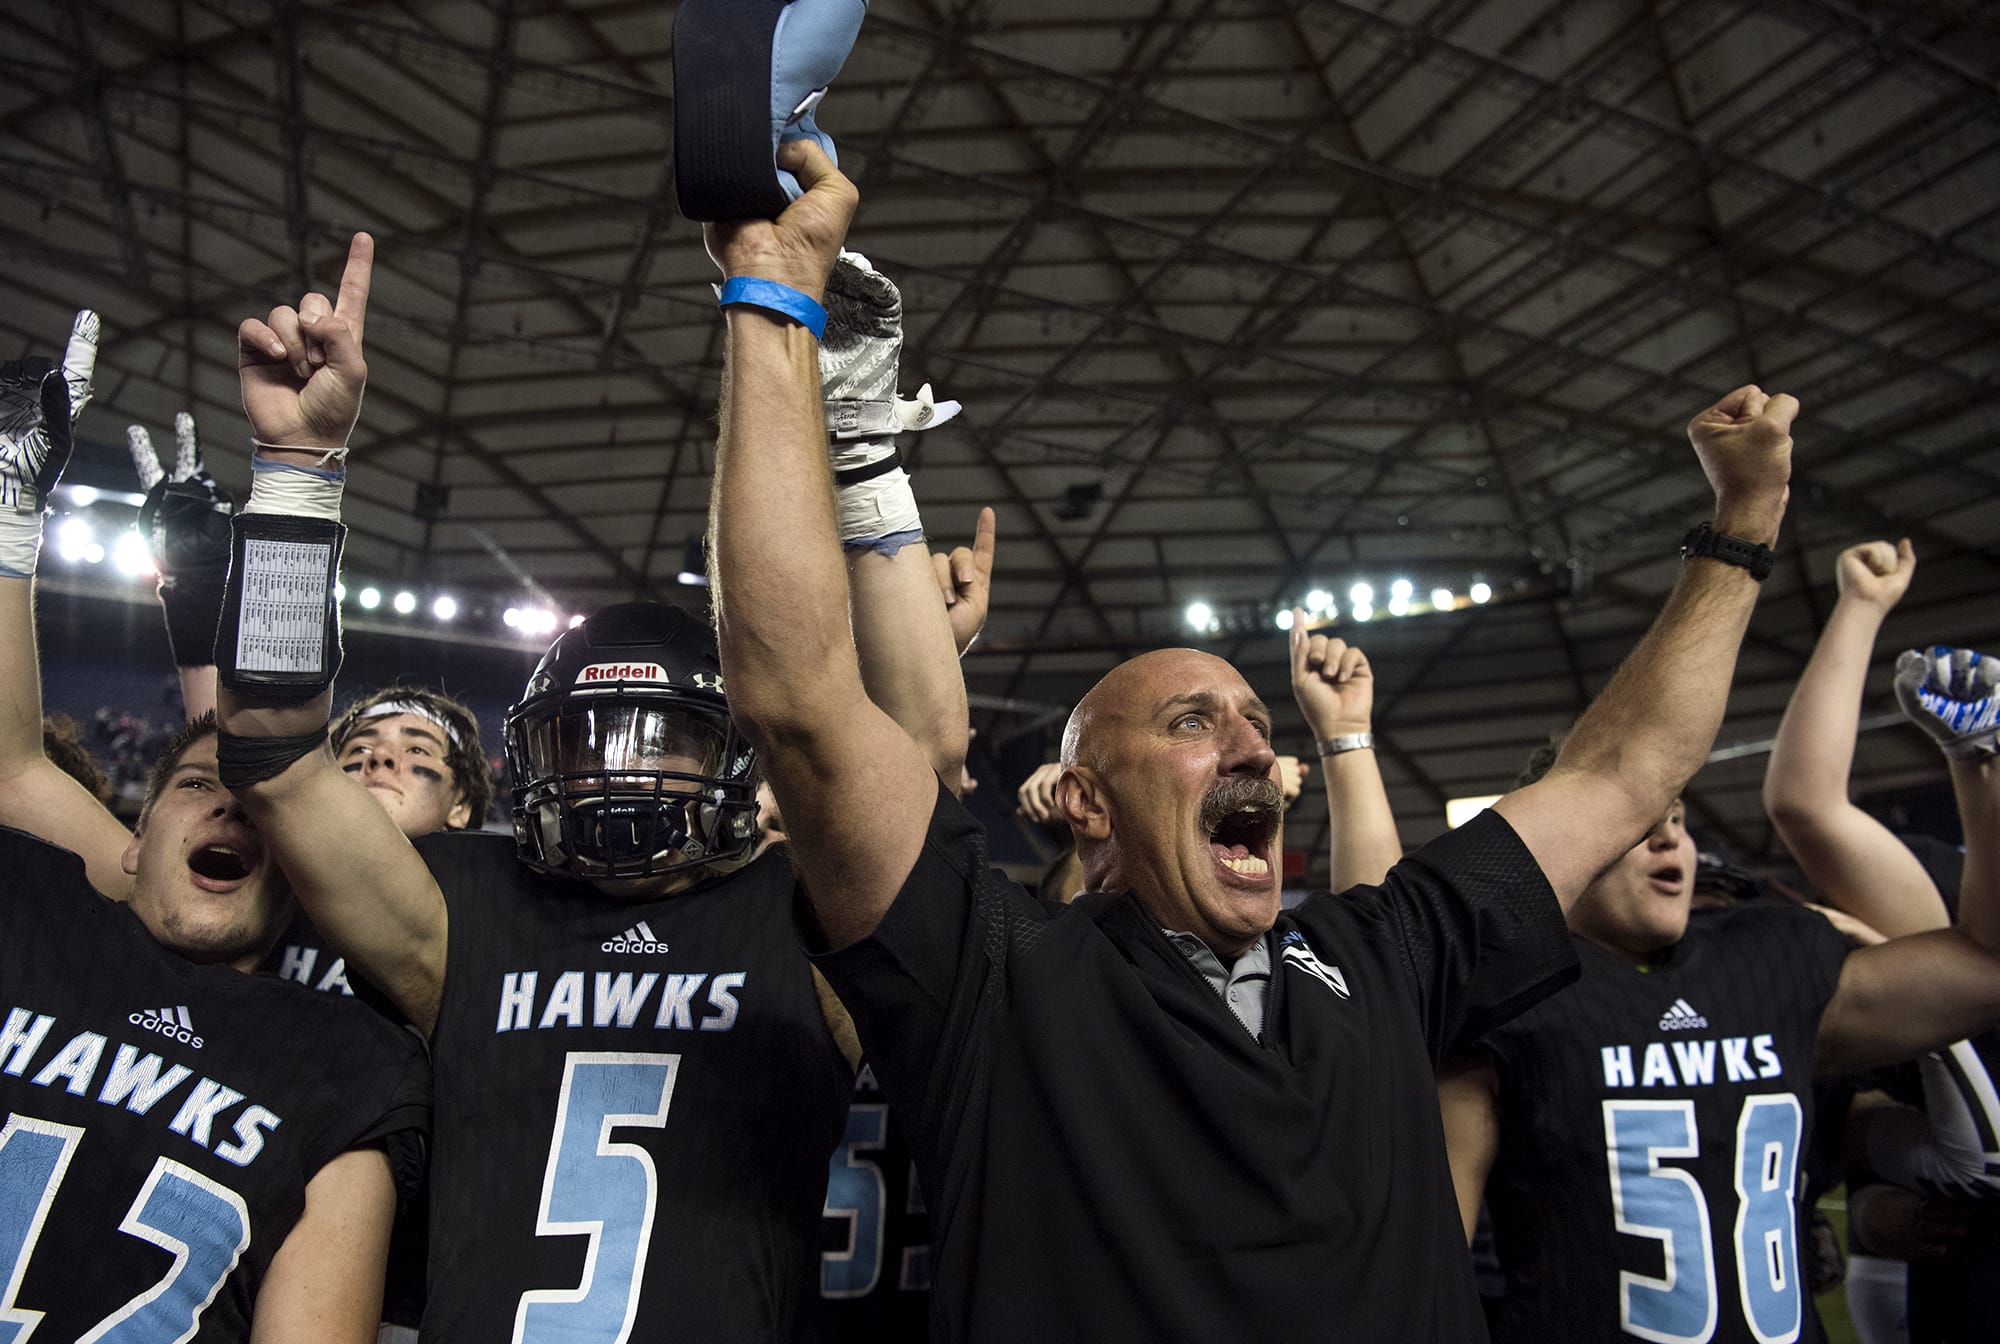 Hockinson coach Rick Steele and his team celebrate after winning their second straight 2A state football championship game on Saturday, Dec. 1, 2018, in Tacoma, Wash. Hockinson defeated Lynden 42-37.